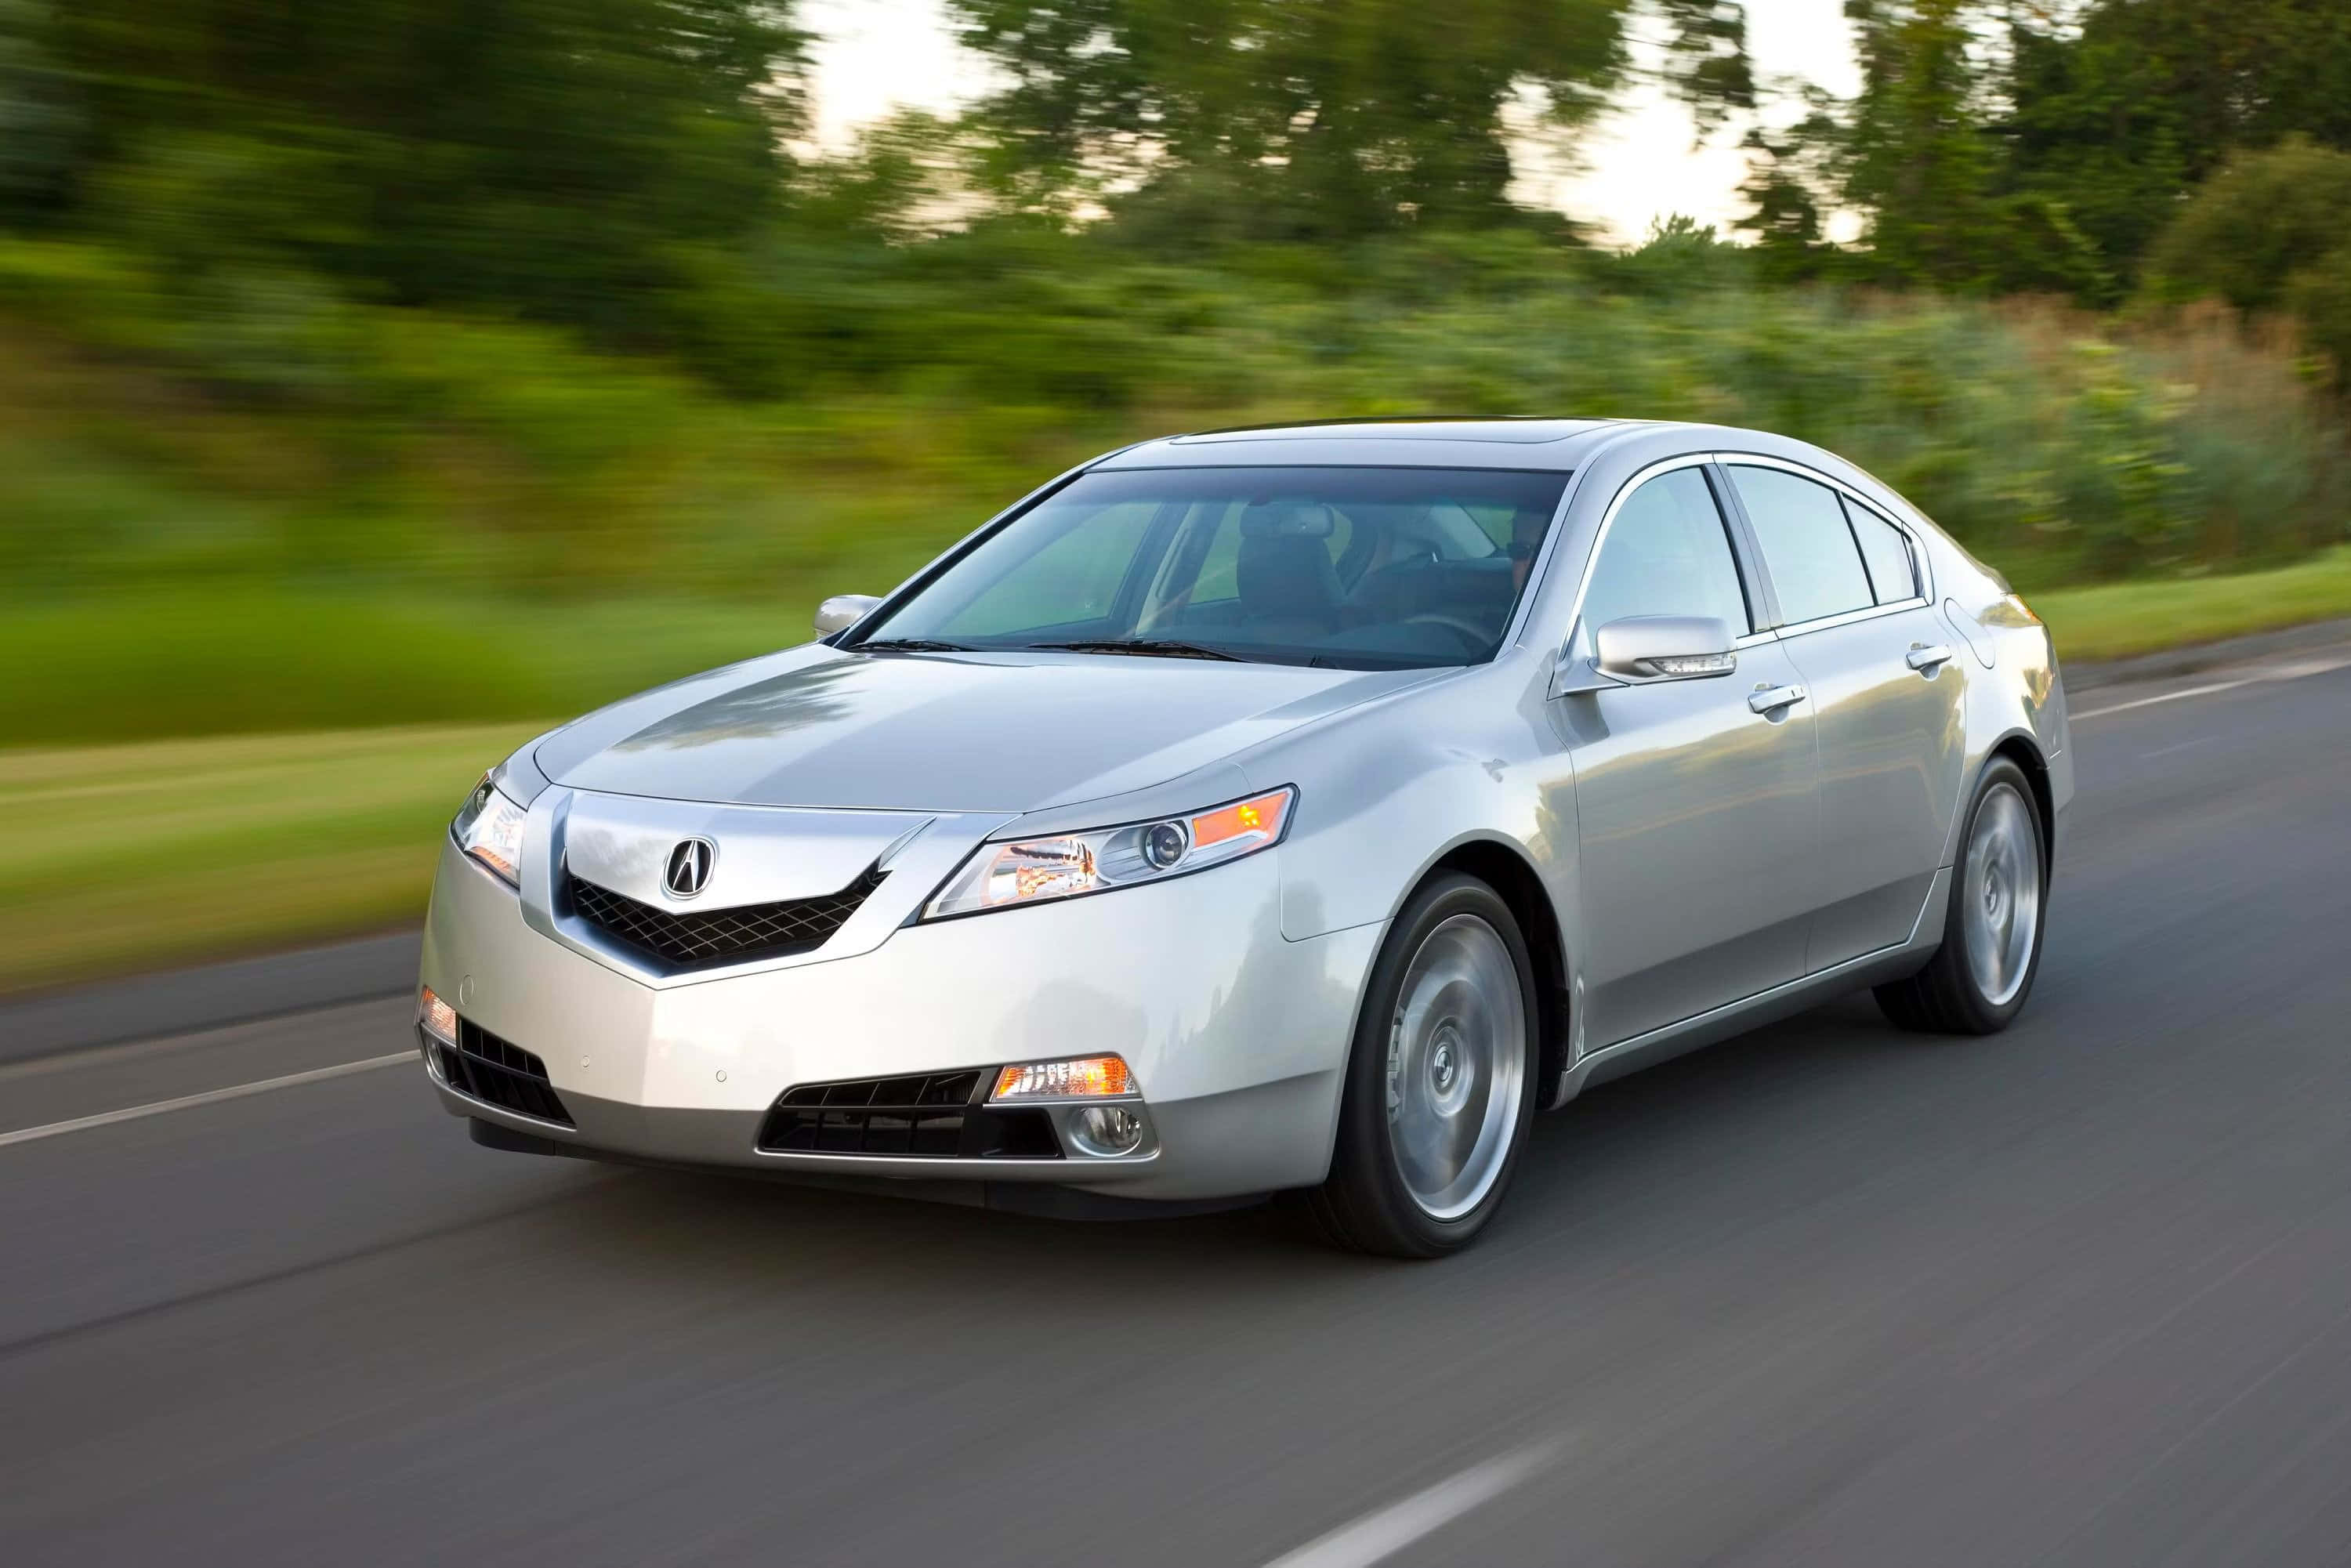 Bright and spacious, the Acura ILX provides luxury and performance.